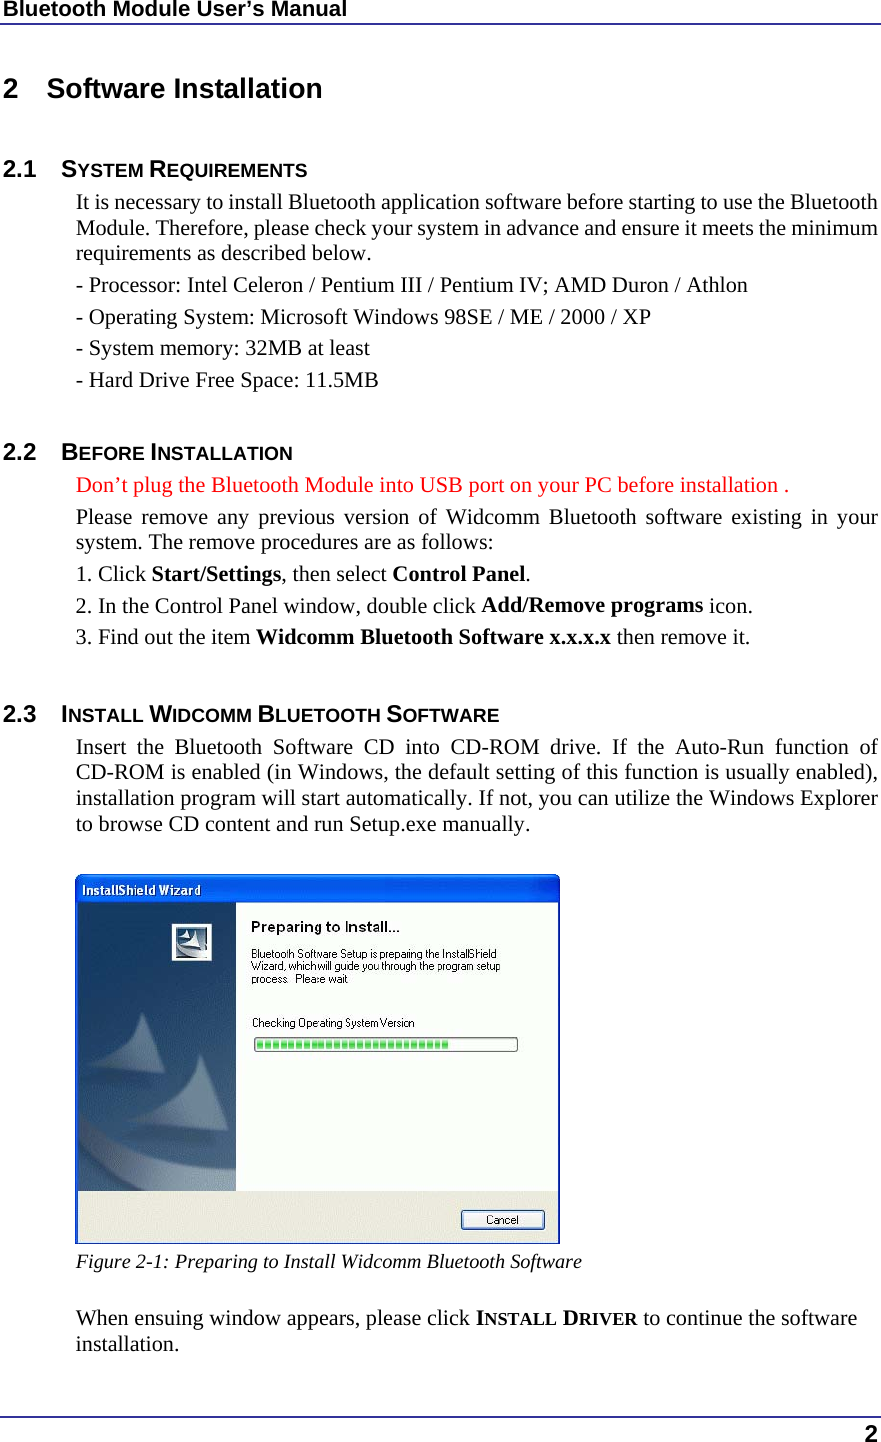 Bluetooth Module User’s Manual  2 2 Software Installation  2.1 SYSTEM REQUIREMENTS It is necessary to install Bluetooth application software before starting to use the Bluetooth Module. Therefore, please check your system in advance and ensure it meets the minimum requirements as described below. - Processor: Intel Celeron / Pentium III / Pentium IV; AMD Duron / Athlon - Operating System: Microsoft Windows 98SE / ME / 2000 / XP - System memory: 32MB at least - Hard Drive Free Space: 11.5MB  2.2 BEFORE INSTALLATION  Don’t plug the Bluetooth Module into USB port on your PC before installation . Please remove any previous version of Widcomm Bluetooth software existing in your system. The remove procedures are as follows: 1. Click Start/Settings, then select Control Panel. 2. In the Control Panel window, double click Add/Remove programs icon. 3. Find out the item Widcomm Bluetooth Software x.x.x.x then remove it.  2.3 INSTALL WIDCOMM BLUETOOTH SOFTWARE Insert the Bluetooth Software CD into CD-ROM drive. If the Auto-Run function of CD-ROM is enabled (in Windows, the default setting of this function is usually enabled), installation program will start automatically. If not, you can utilize the Windows Explorer to browse CD content and run Setup.exe manually.   Figure 2-1: Preparing to Install Widcomm Bluetooth Software  When ensuing window appears, please click INSTALL DRIVER to continue the software installation. 